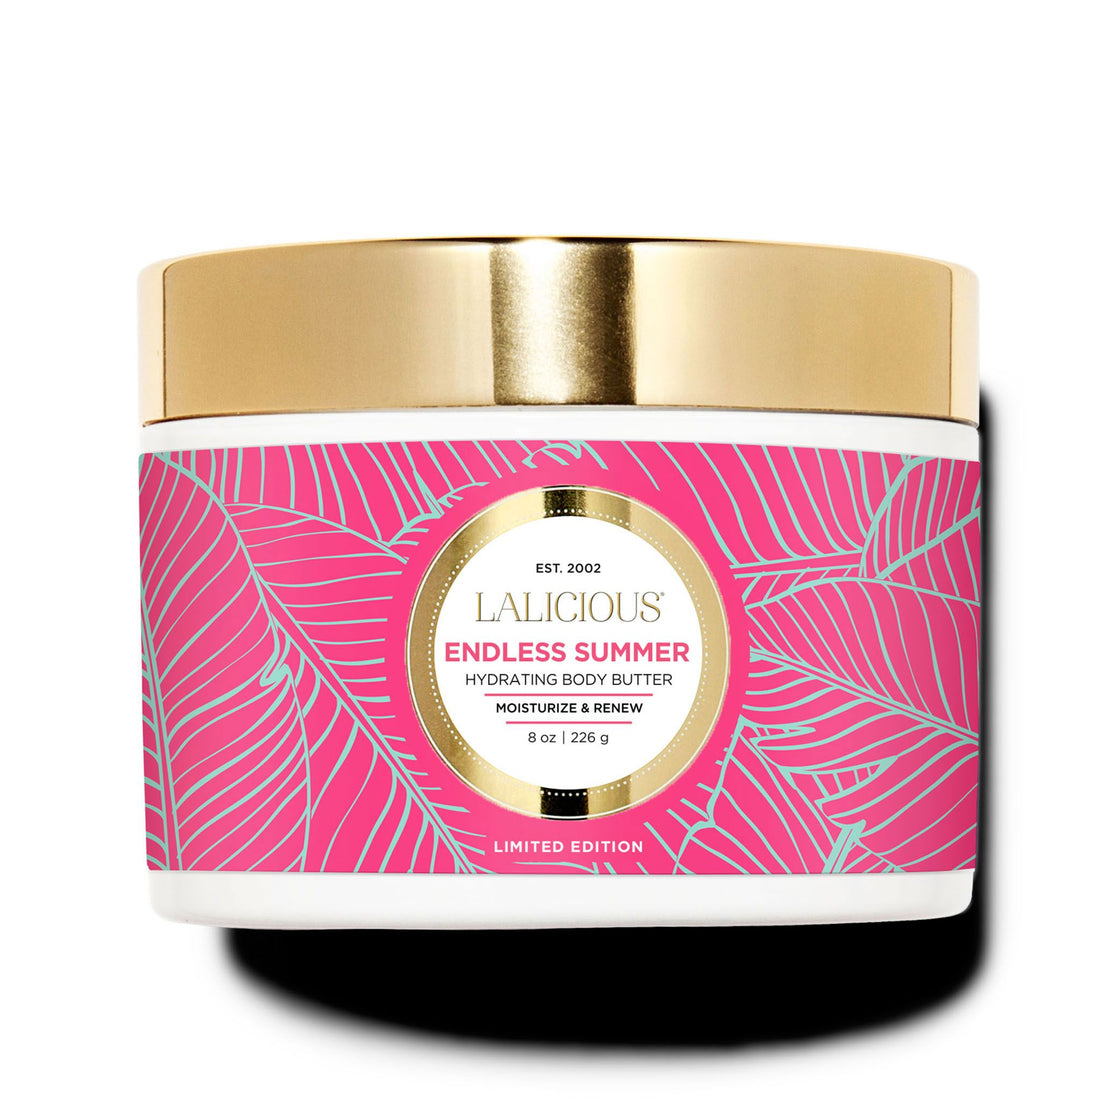 Lalicious Endless Summer Body Butter - Limited Edition